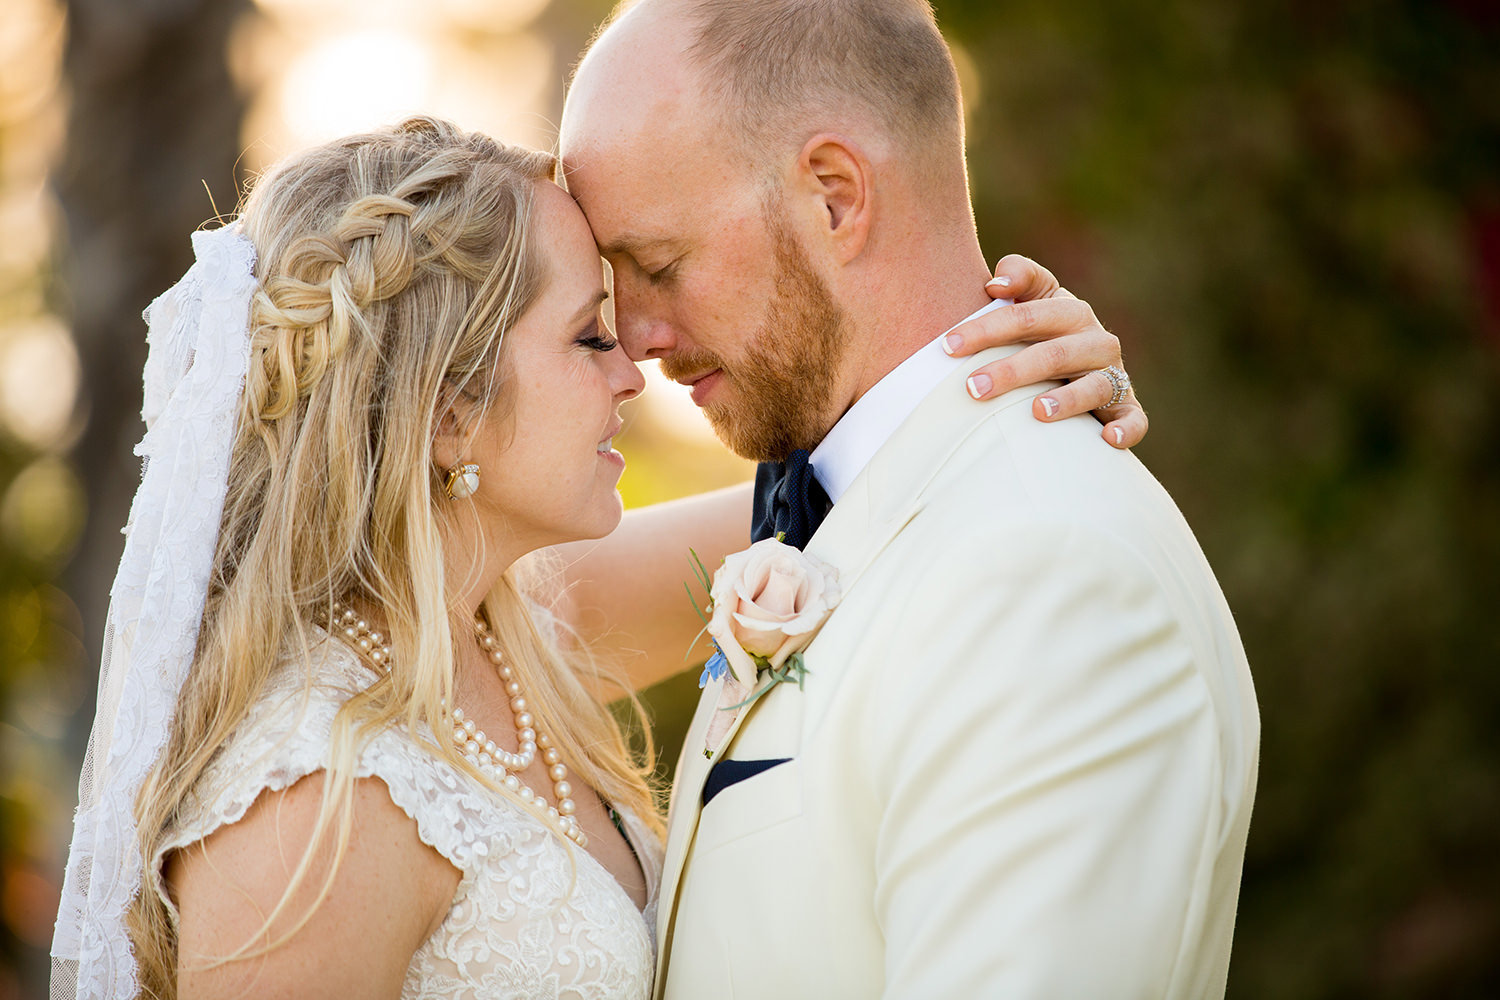 Sweet moment captured in a portrait of the bride and groom